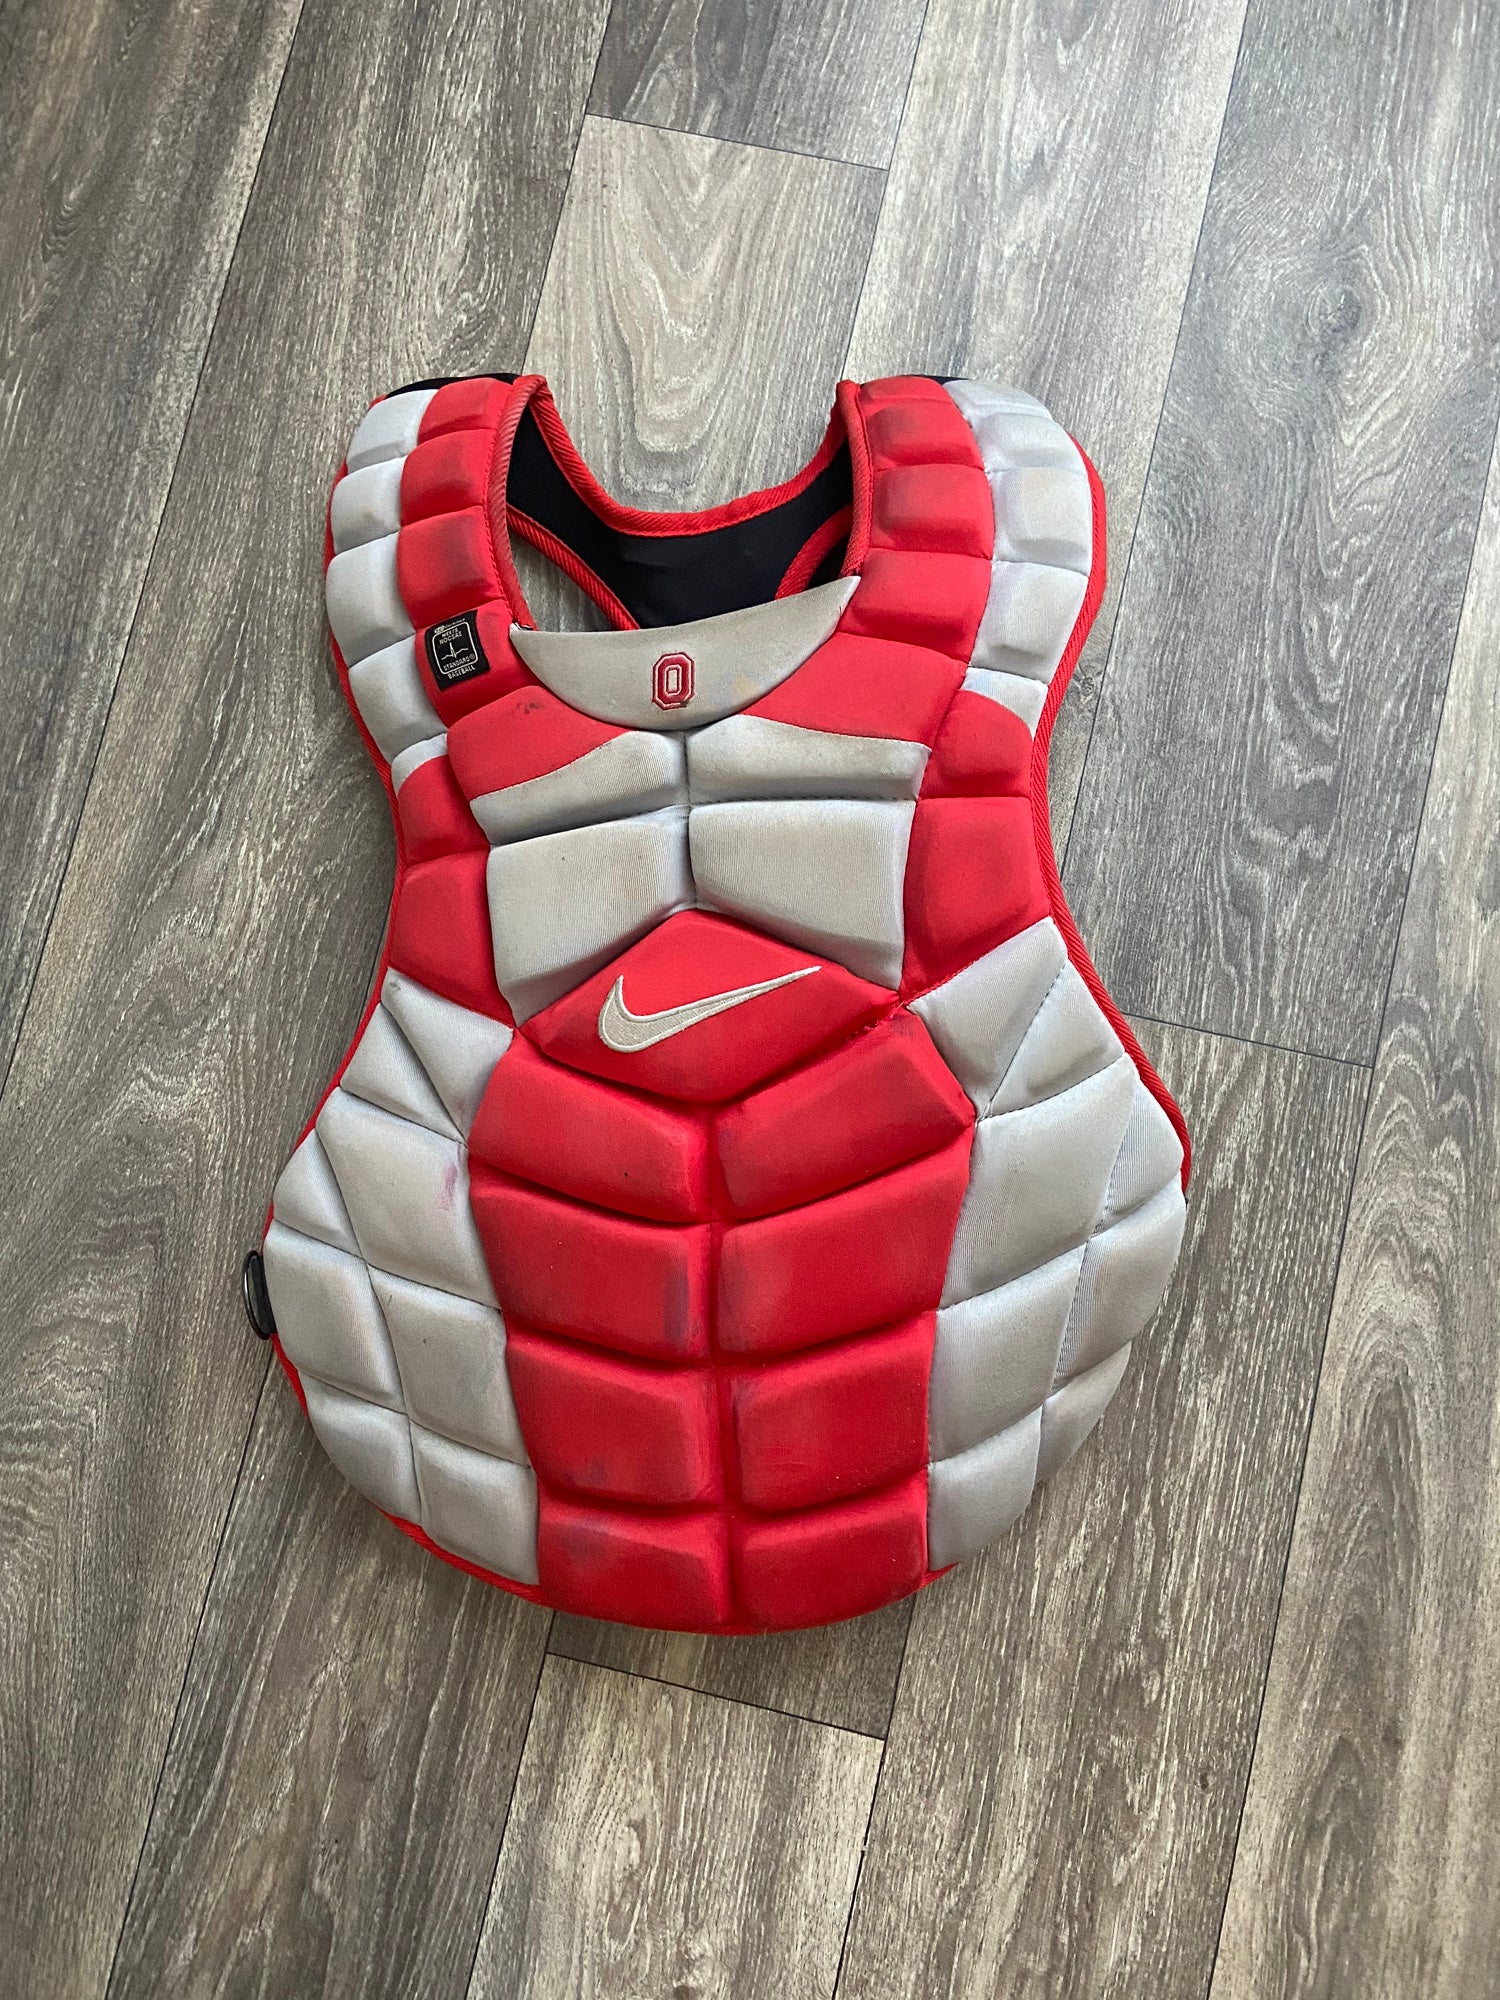 College issued red/grey Nike catchers gear